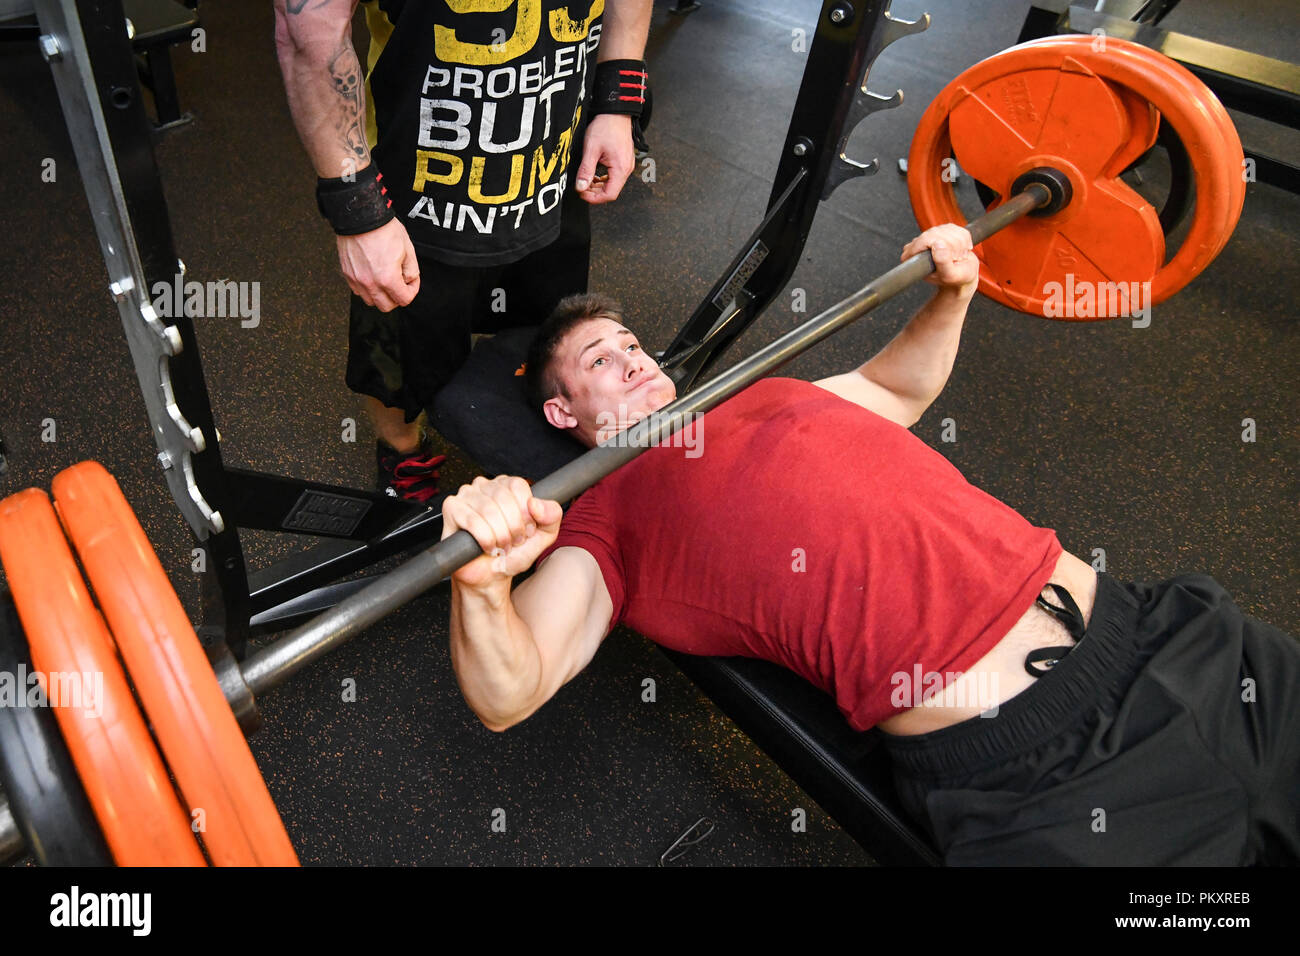 04 September 2018, Bremen: 04 September 2018, Germany, Bremen: Andrew  Fiocco prepares in a fitness studio for the world championship in bench  press. He has already lifted 150 kilograms, with a dead